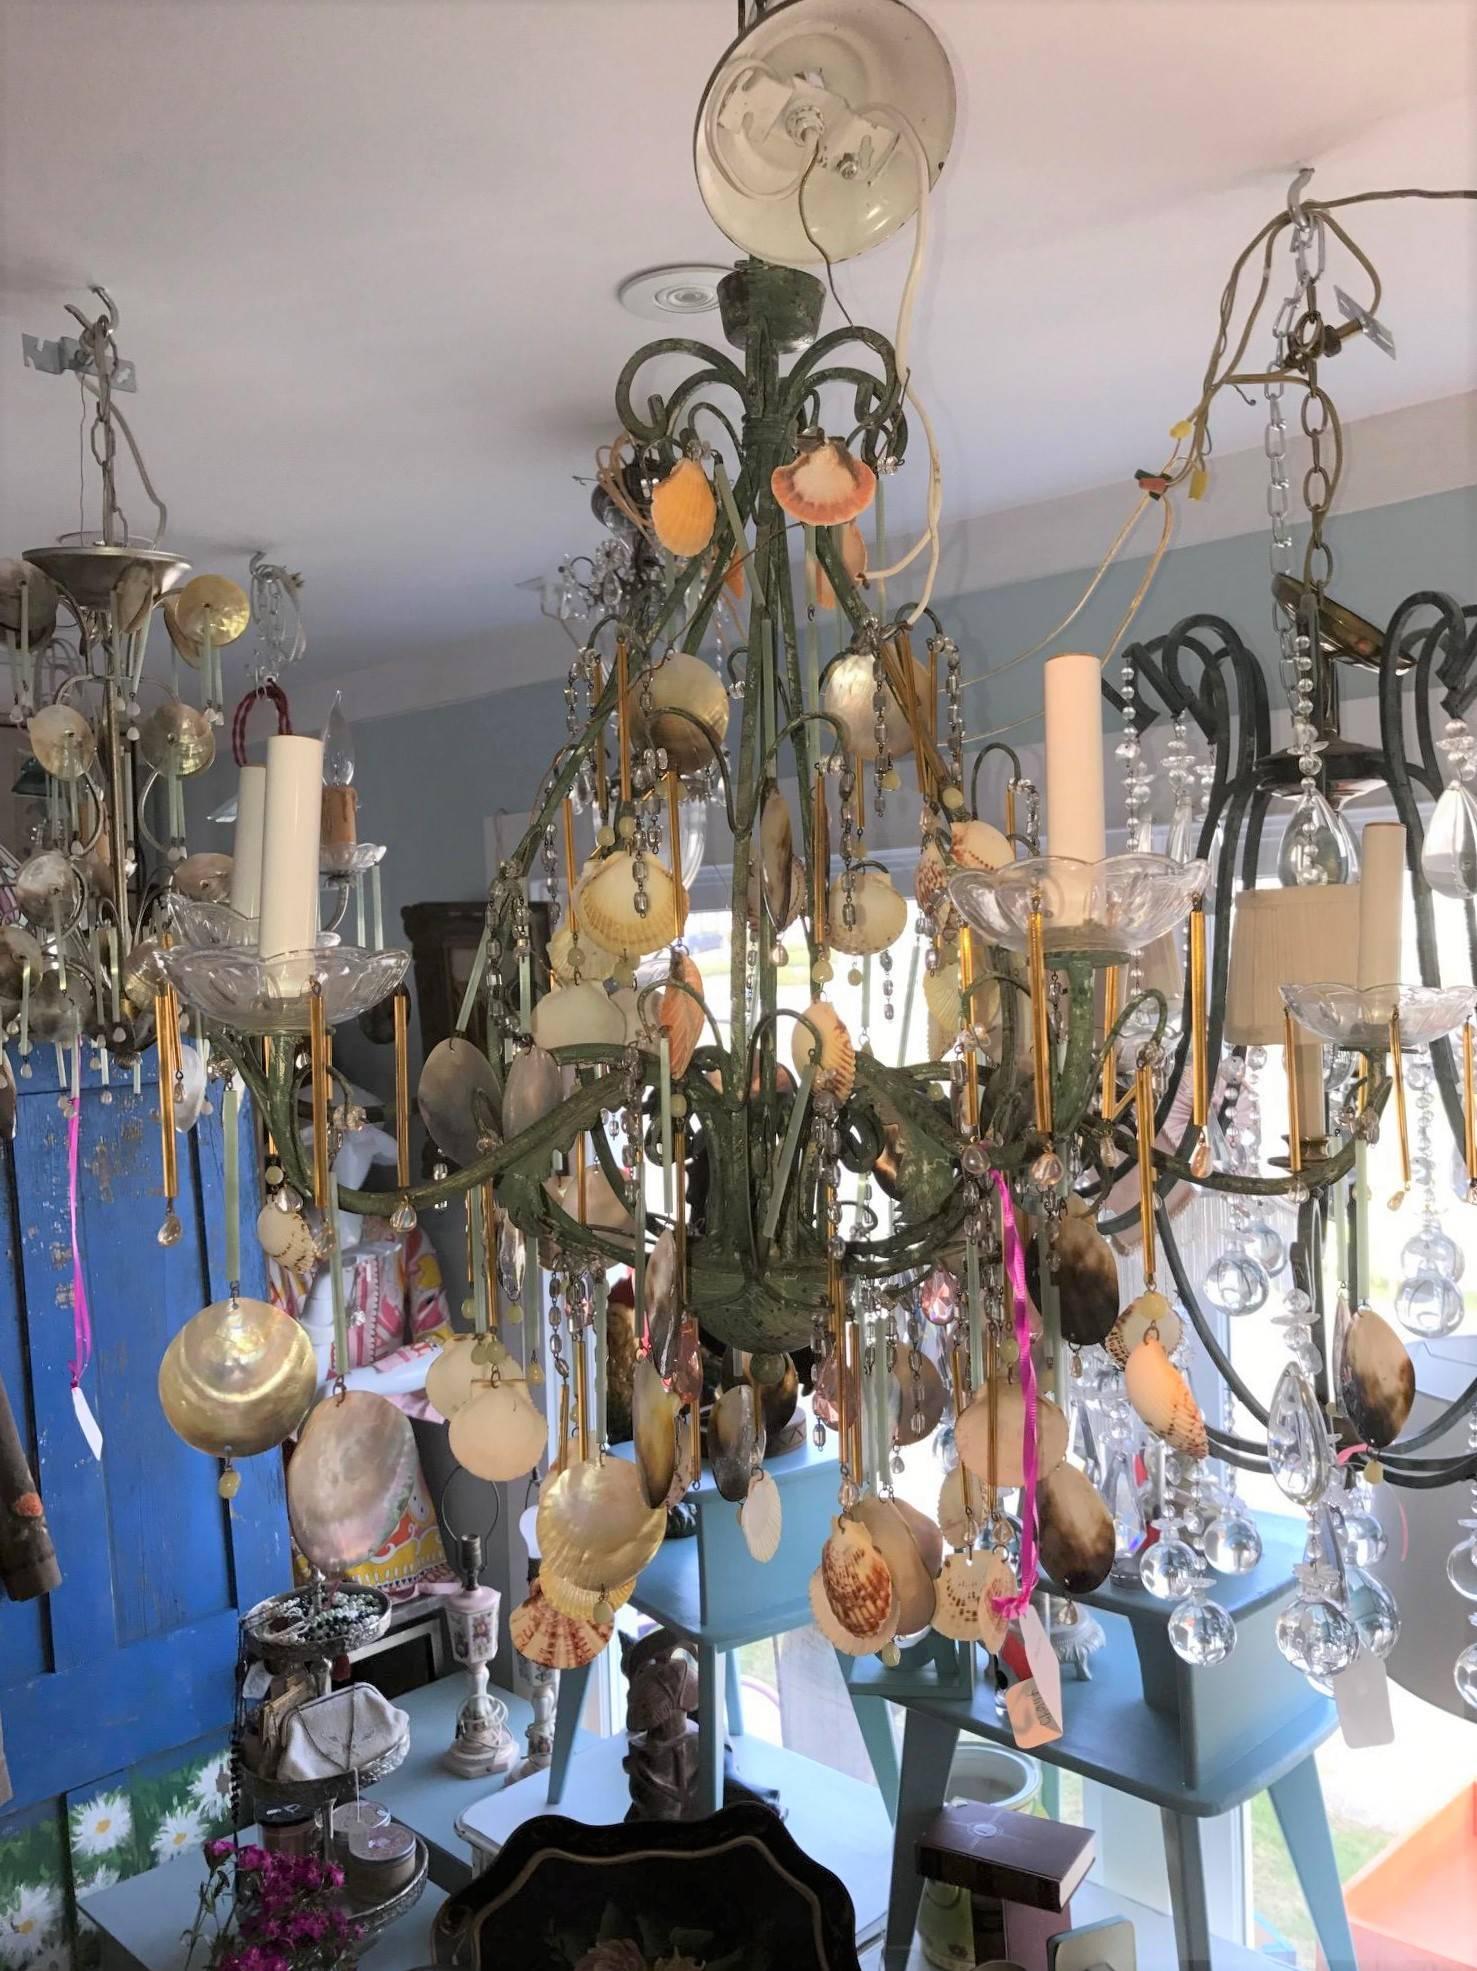 Sea Shell Chandelier --Violet's,  Amber And Sea Colors Adorn This Beauty.  Crystals and Shell's A Beautiful Combination - Dress Up or Dress Down with A Hint of  Beach Simplicity with This Antiqued Beautiful Five-Arm Chandelier.

On Sale Now!